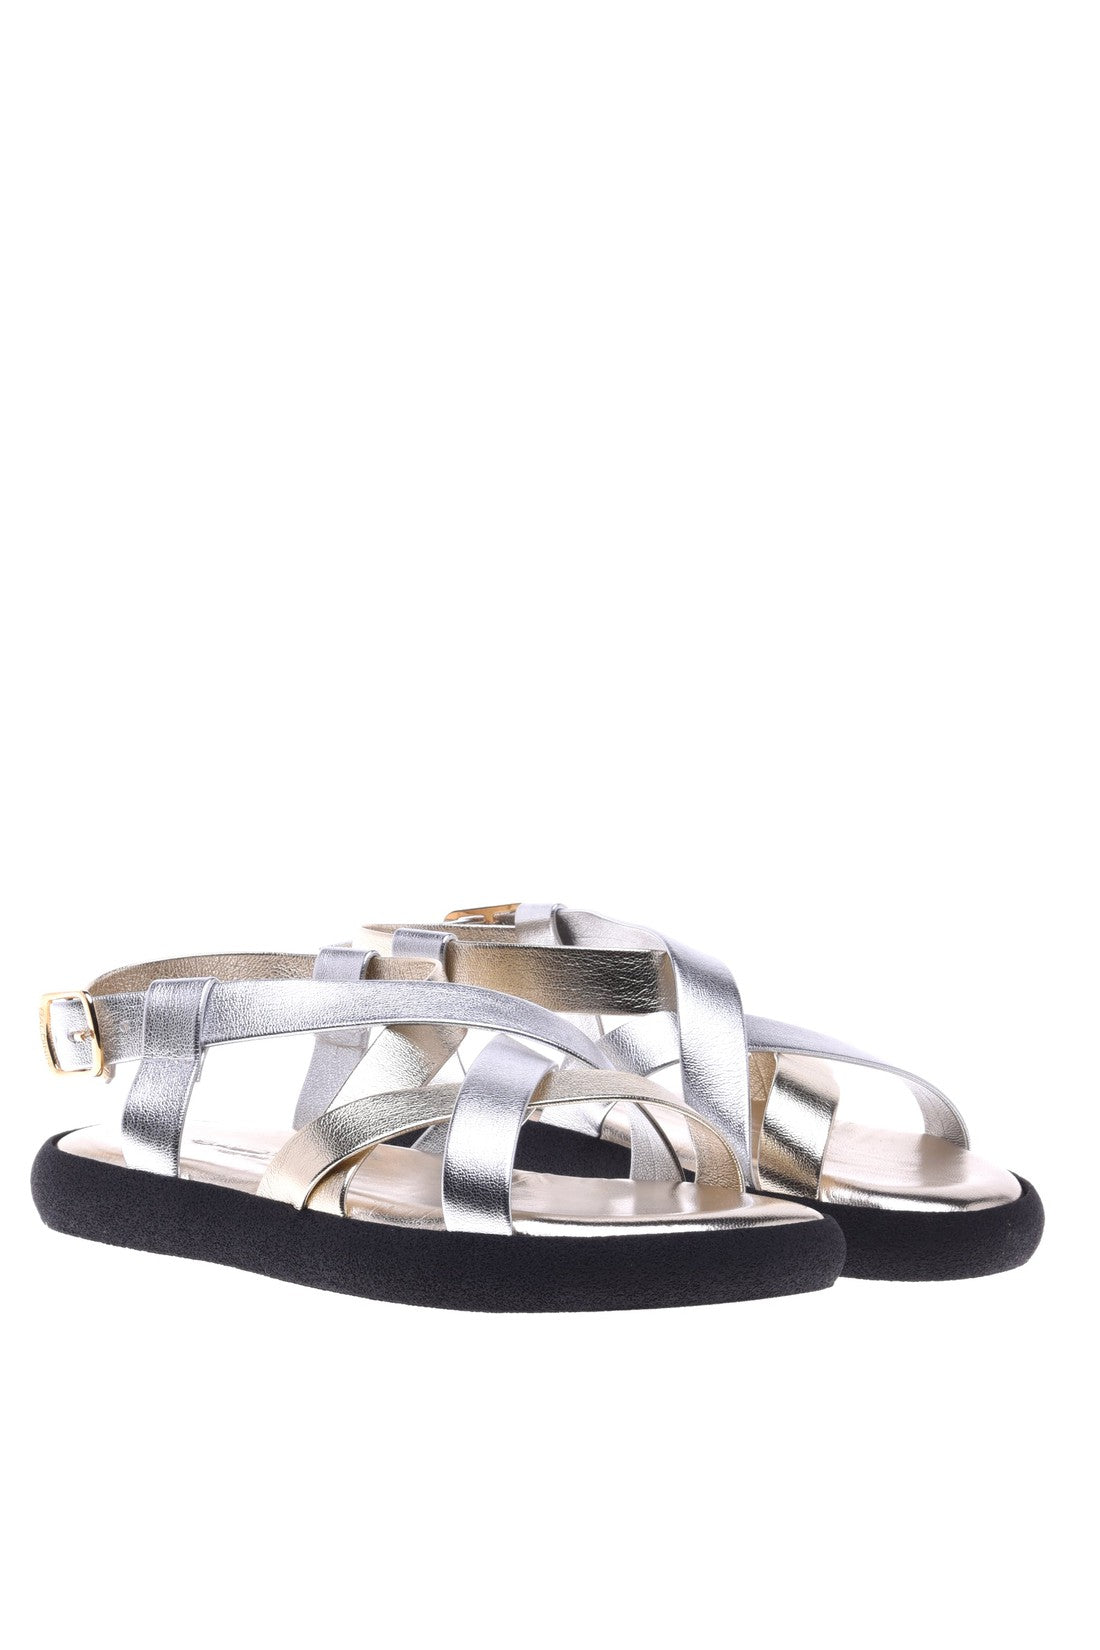 Sandal in silver and platinum laminated nappa leather